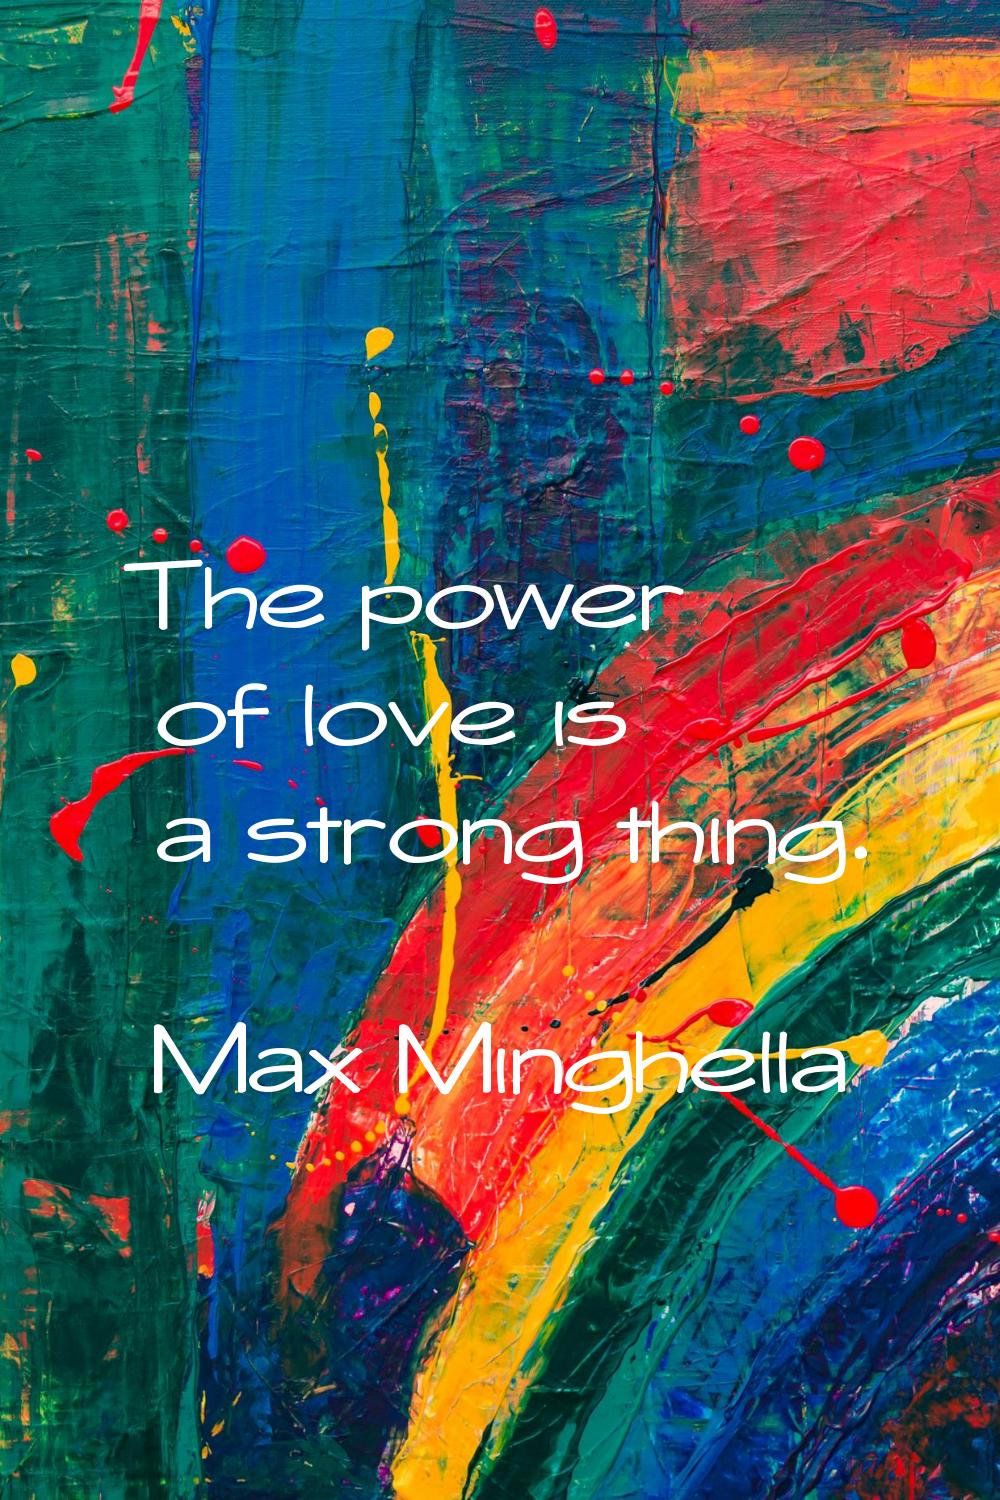 The power of love is a strong thing.